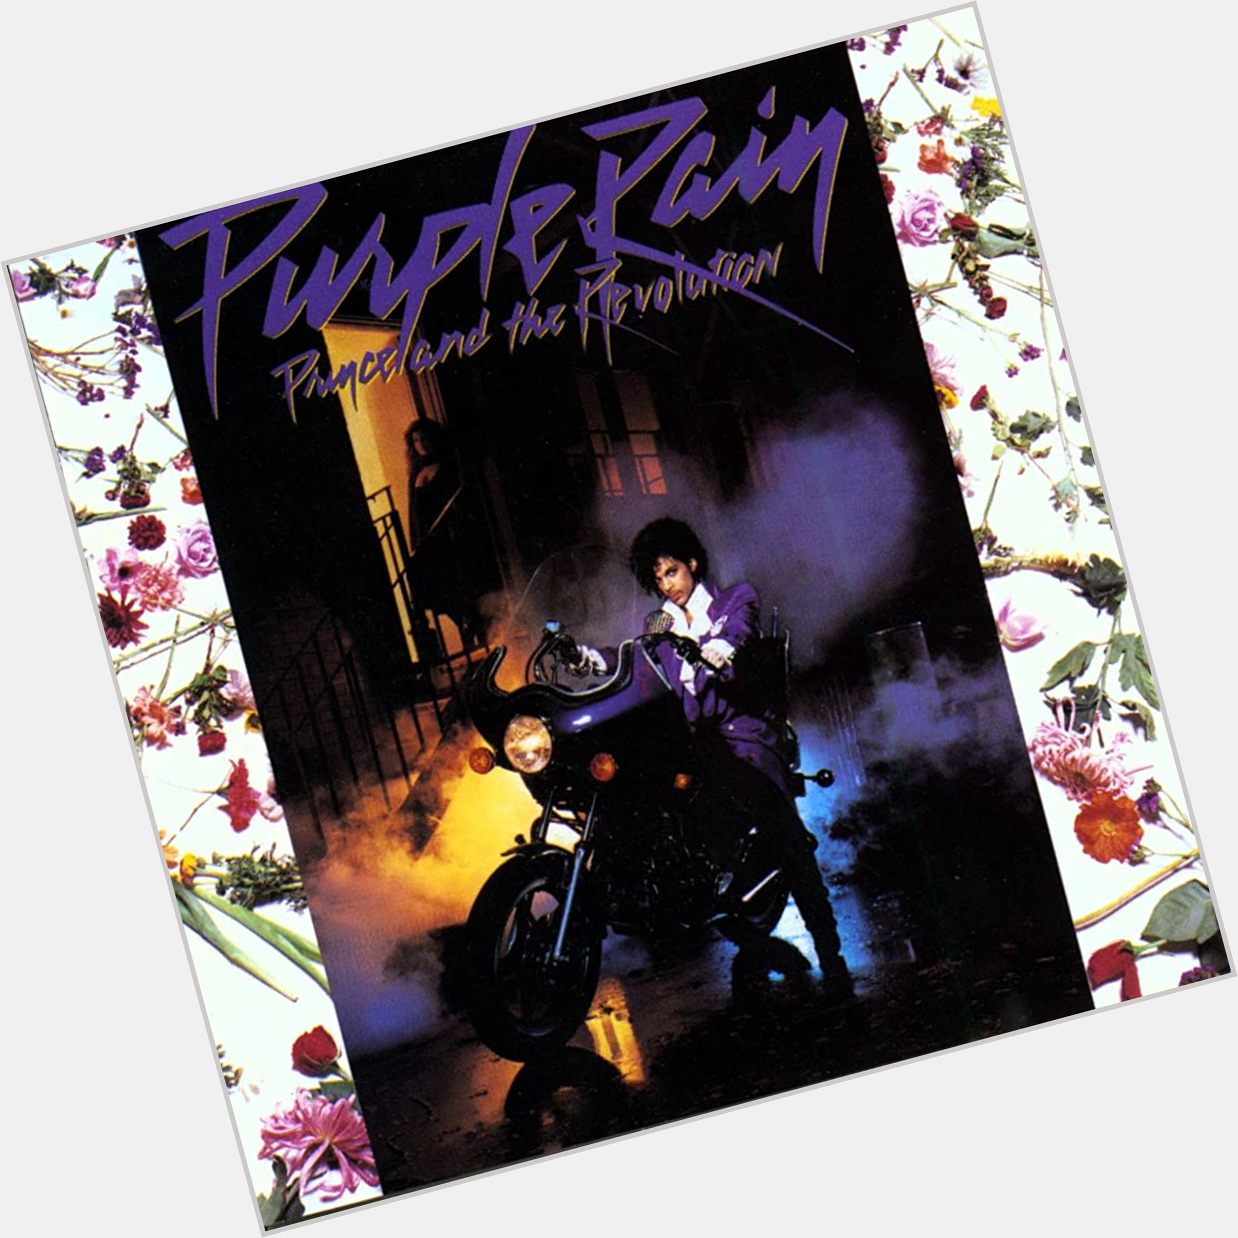 Happy 39th birthday to Purple Rain by Prince.
What\s your favourite song from this album ? 